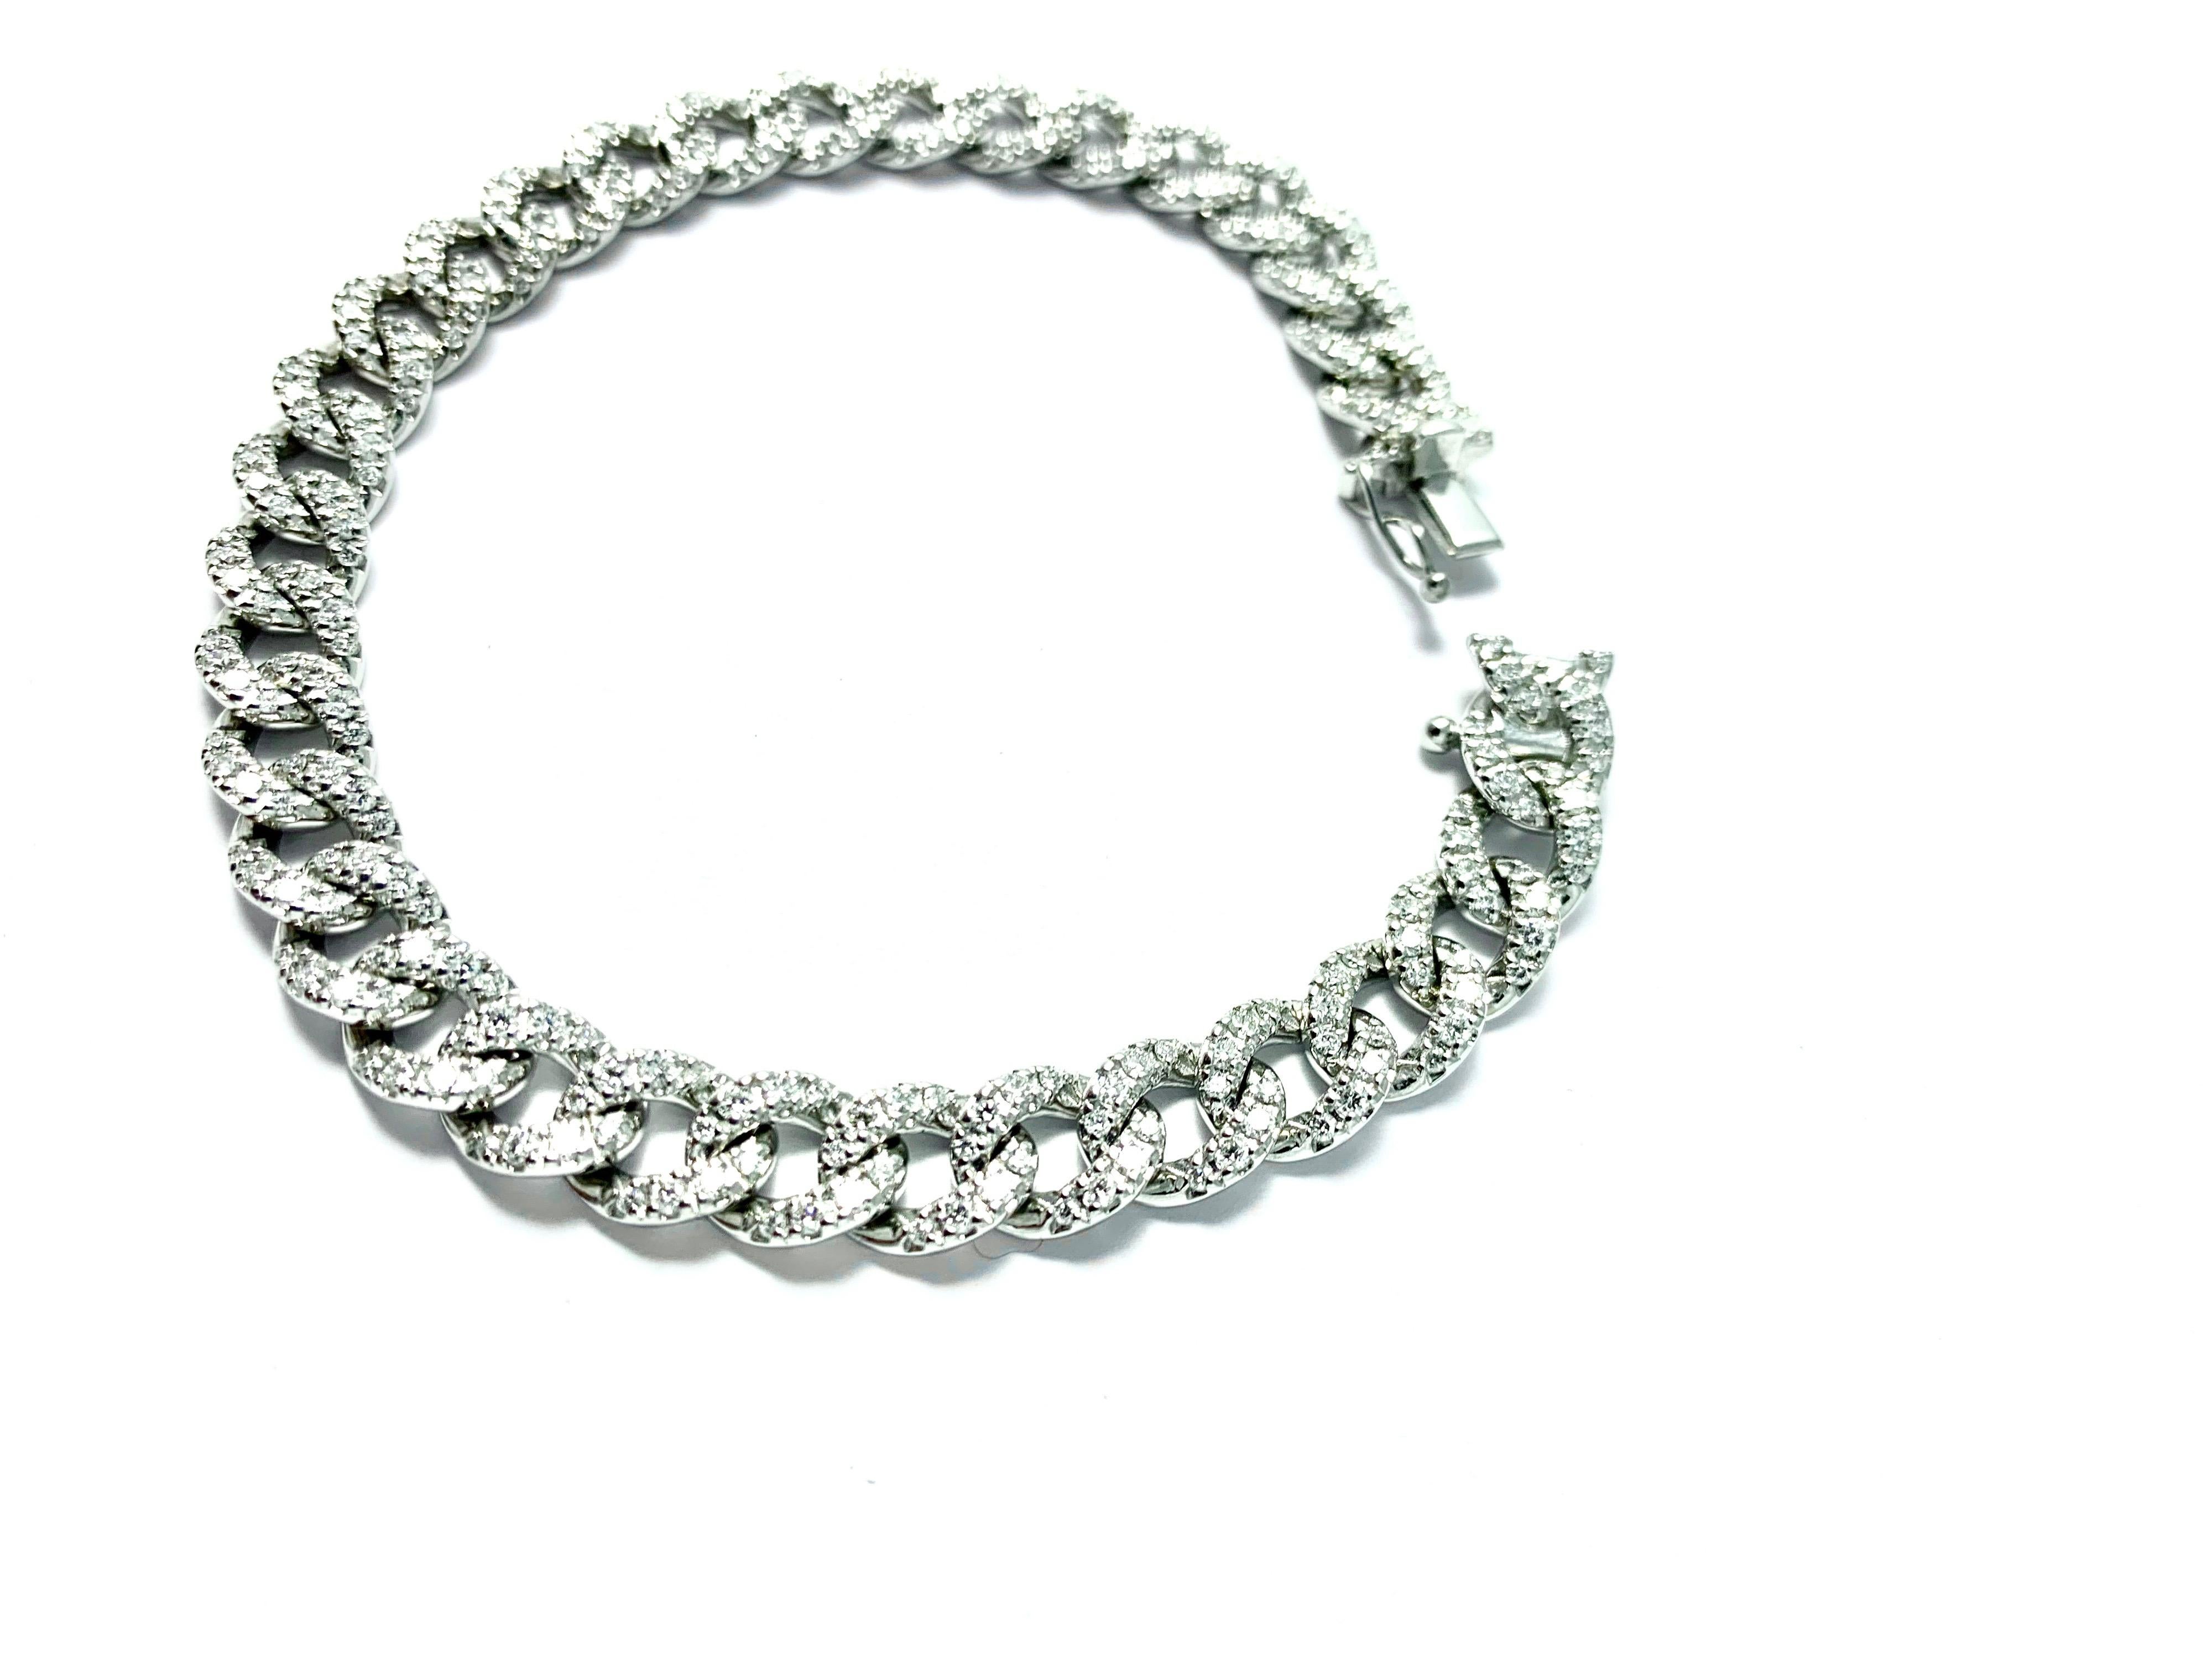 Cuban solid white gold bracelet hand made in italy
weight of gold gr 19.20
white diamond clarity g quality vvs1 ct 2.37